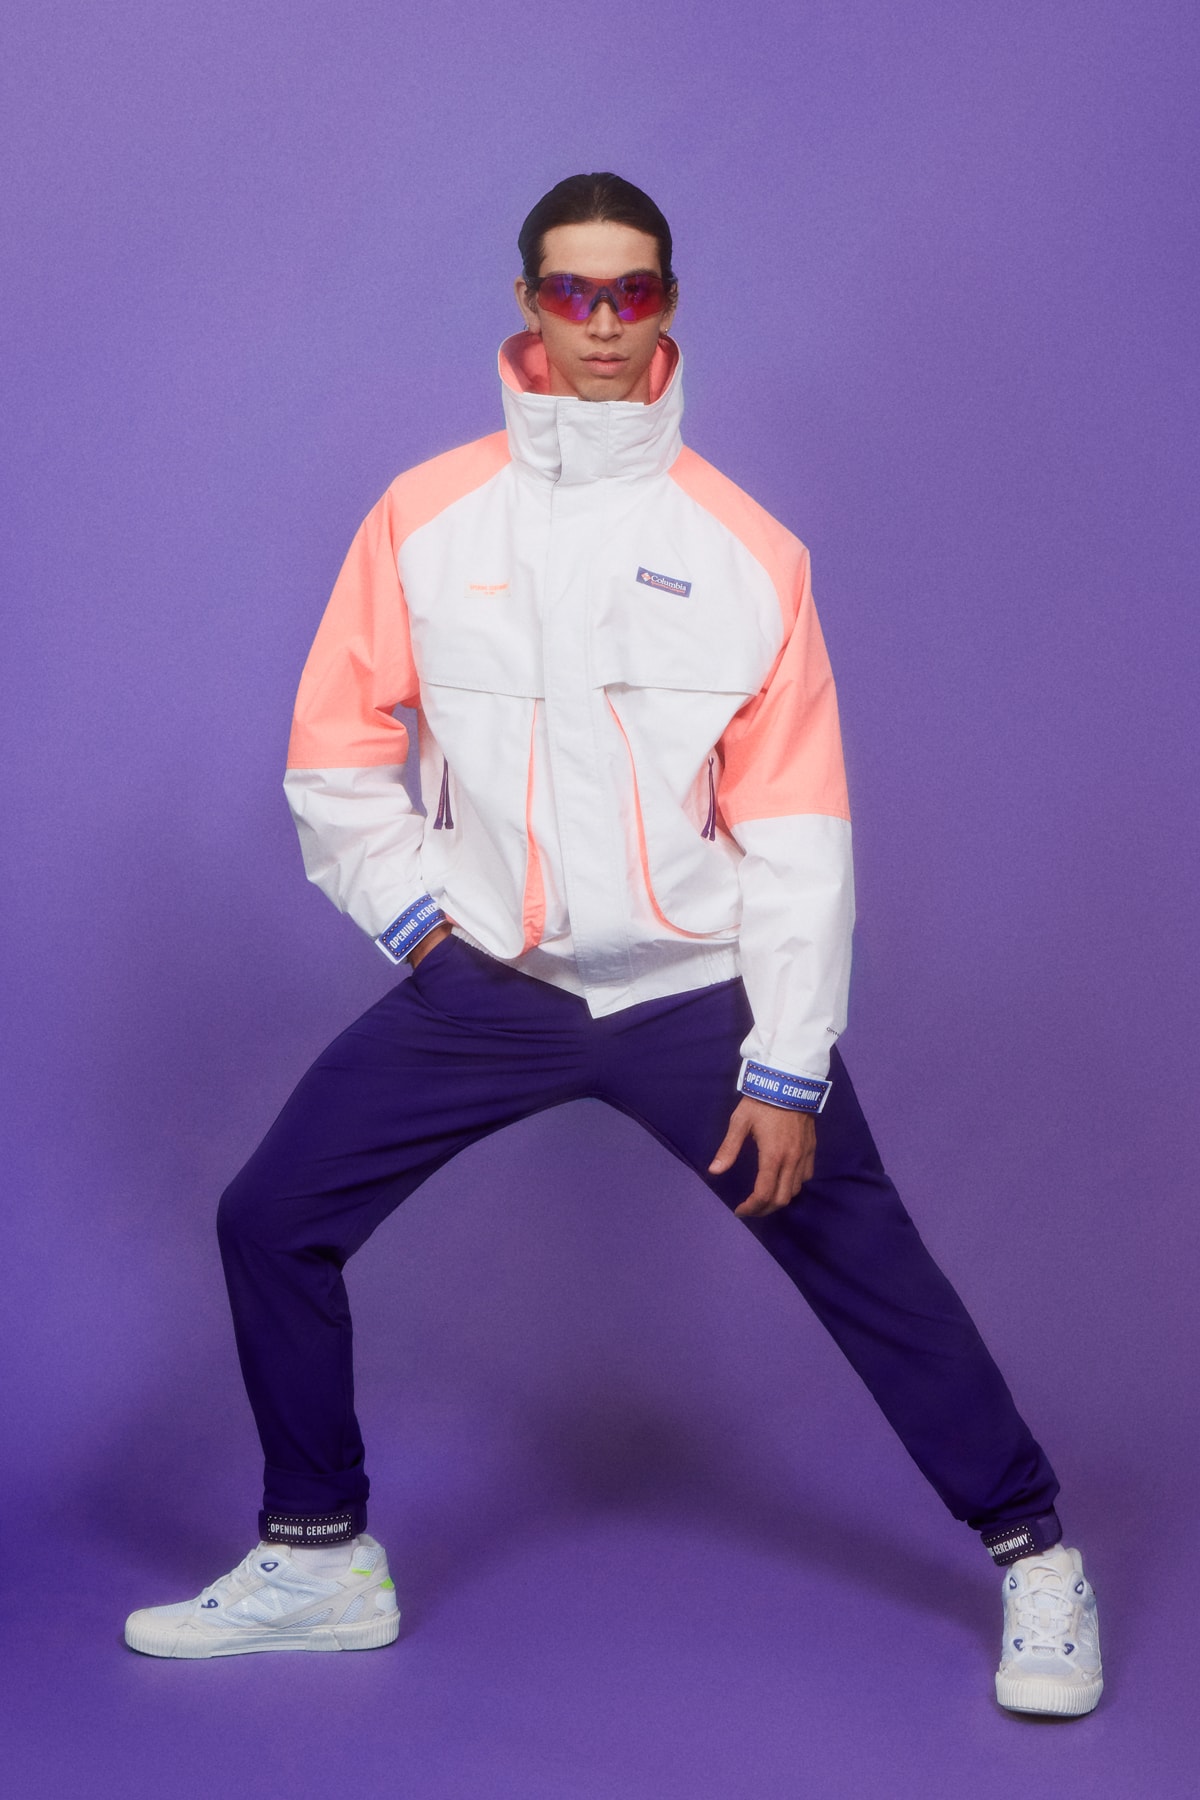 Columbia x Opening Ceremony Fall Winter 2018 Collection Jacket Orange White Pants Purple